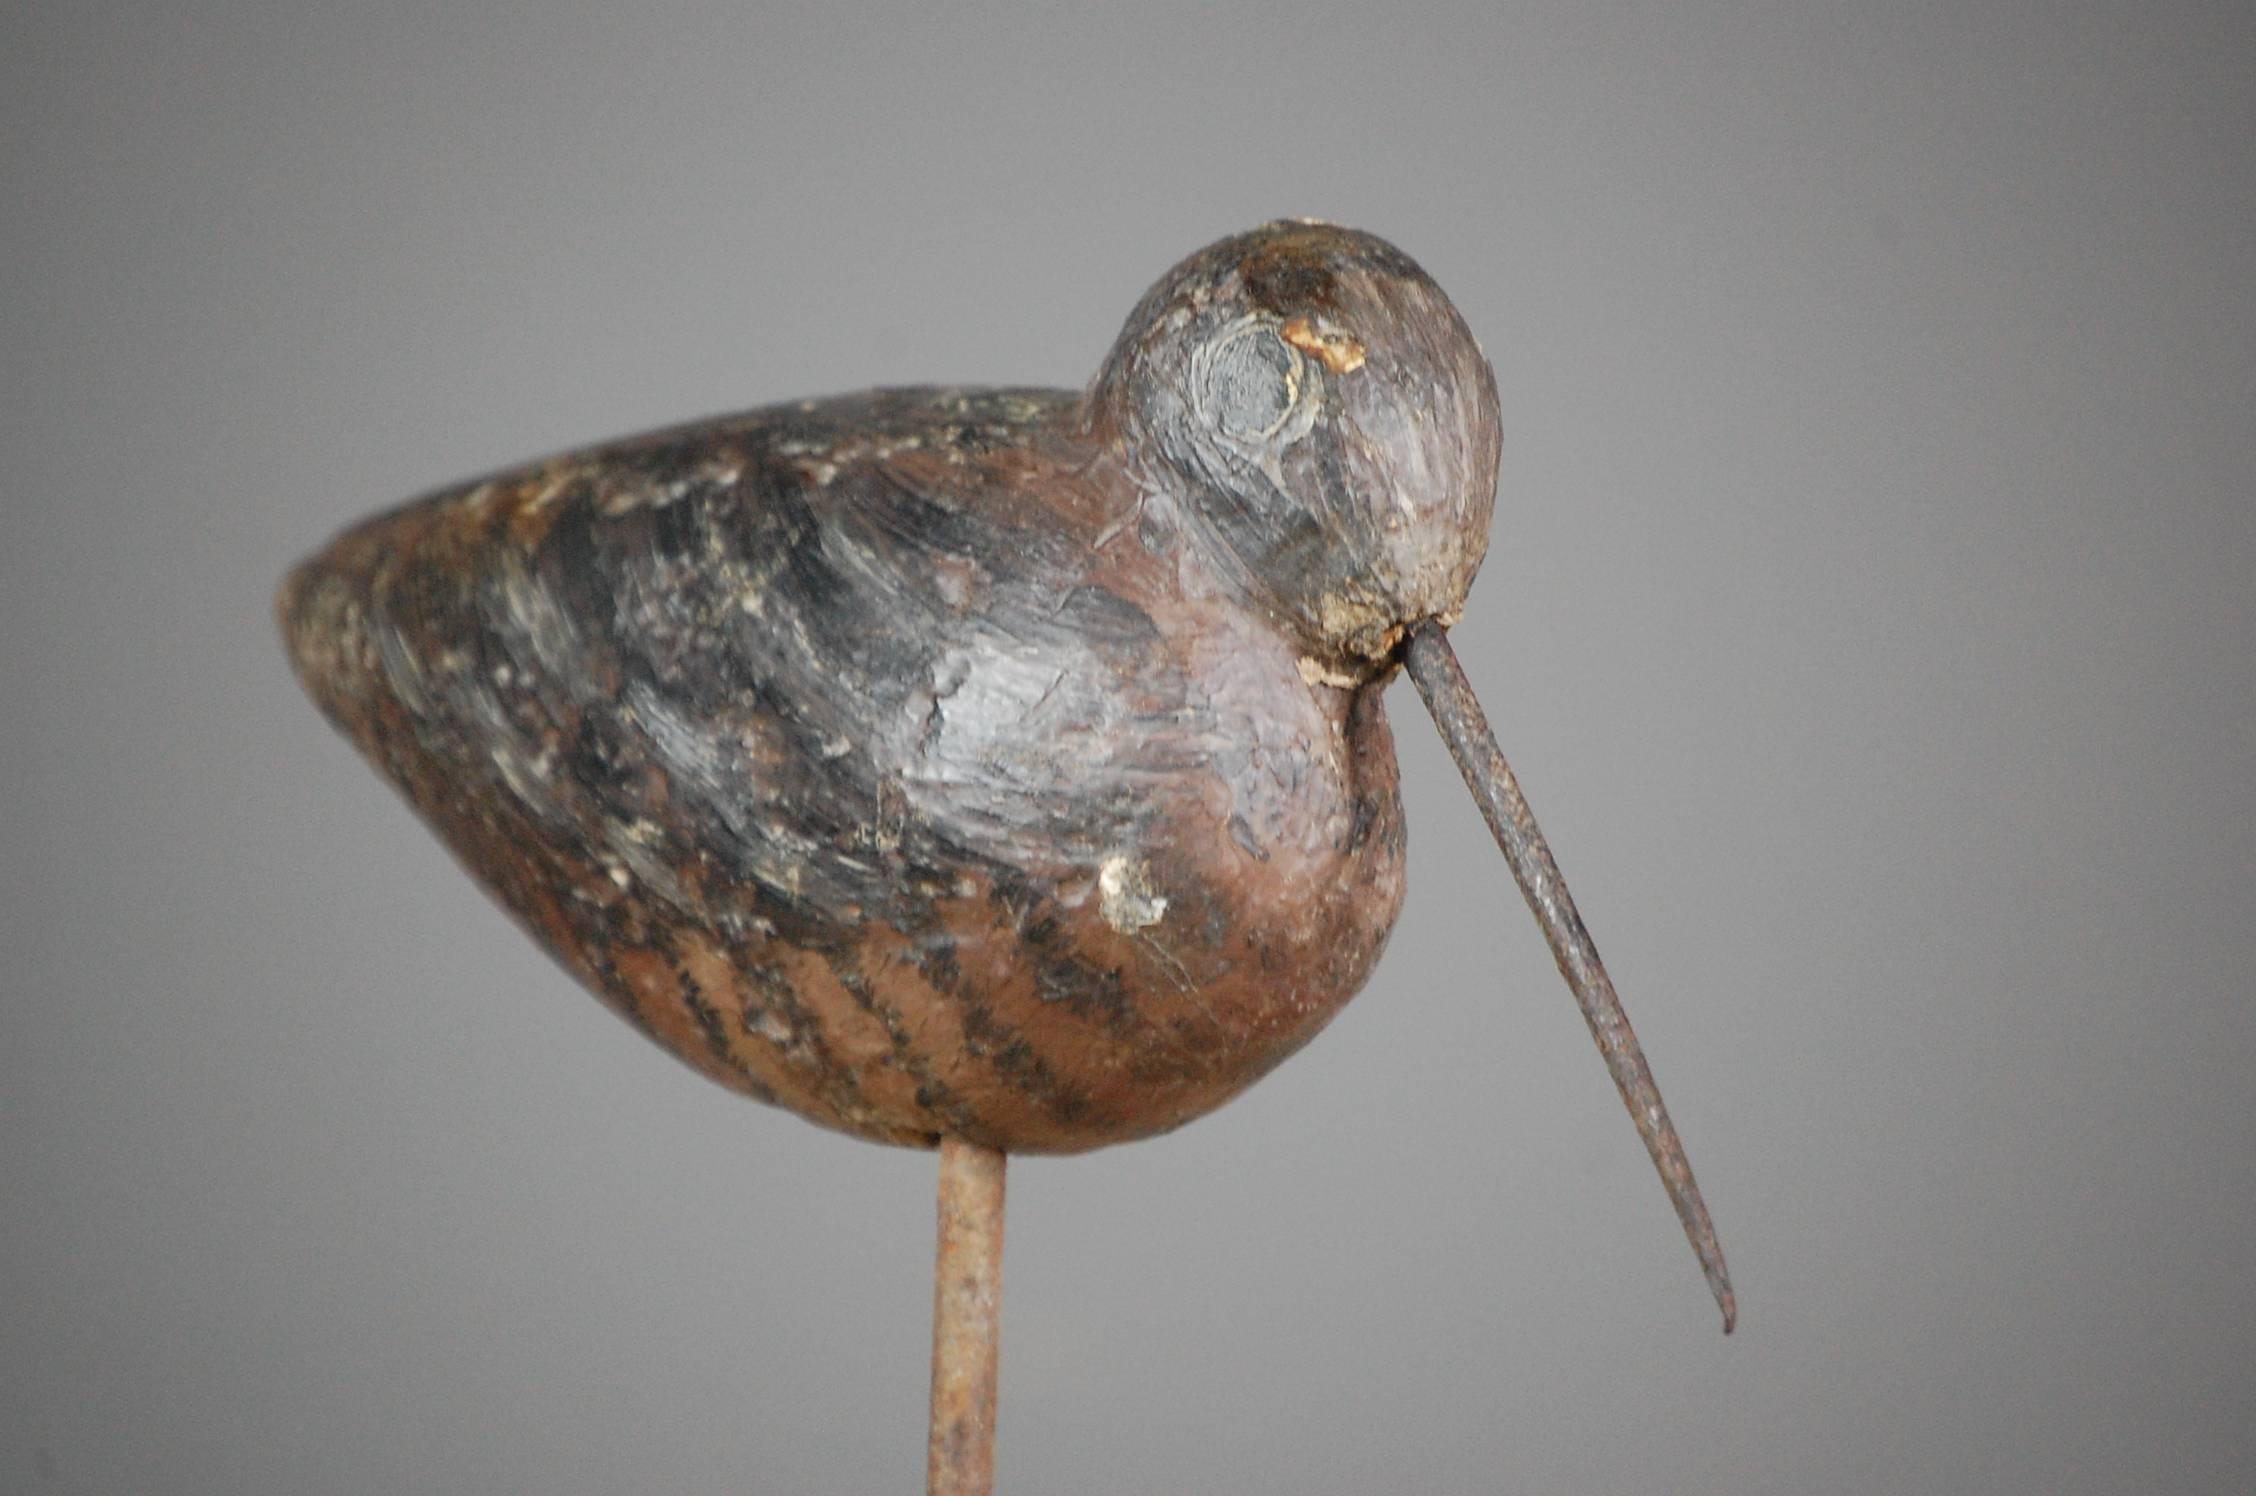 Late 19th century working woodcock or snipe decoy, original paint. Charming bulbous form. Unusual to find such decoys capturing the form of the particular they intend to imitate so well, France, circa 1890.